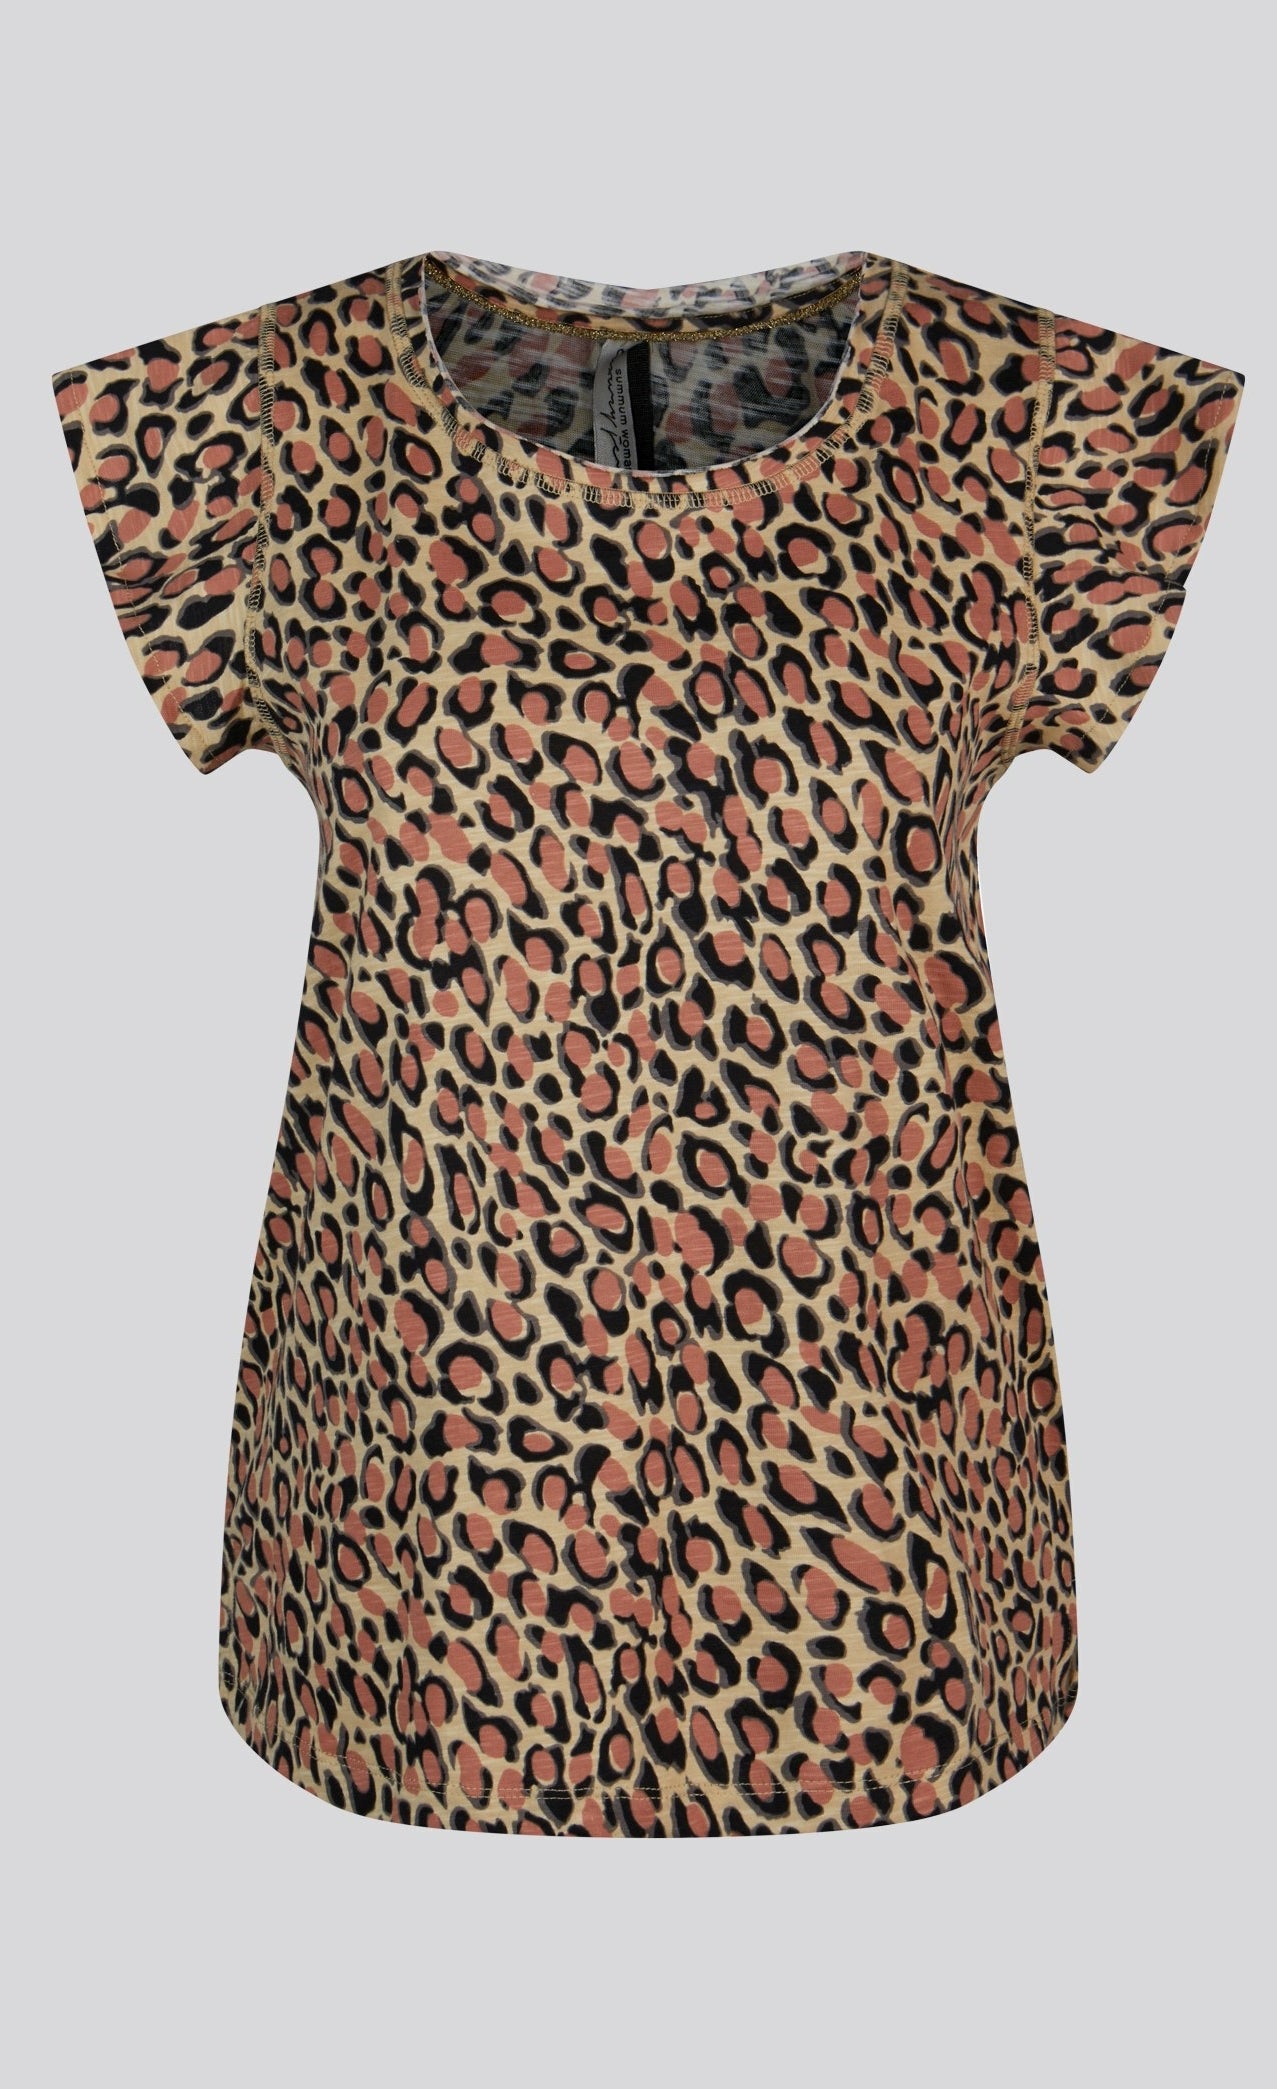 Front view of the summum animal print t-shirt. The T-shirt has short cap sleeves and a pink and navy animal print all over it.